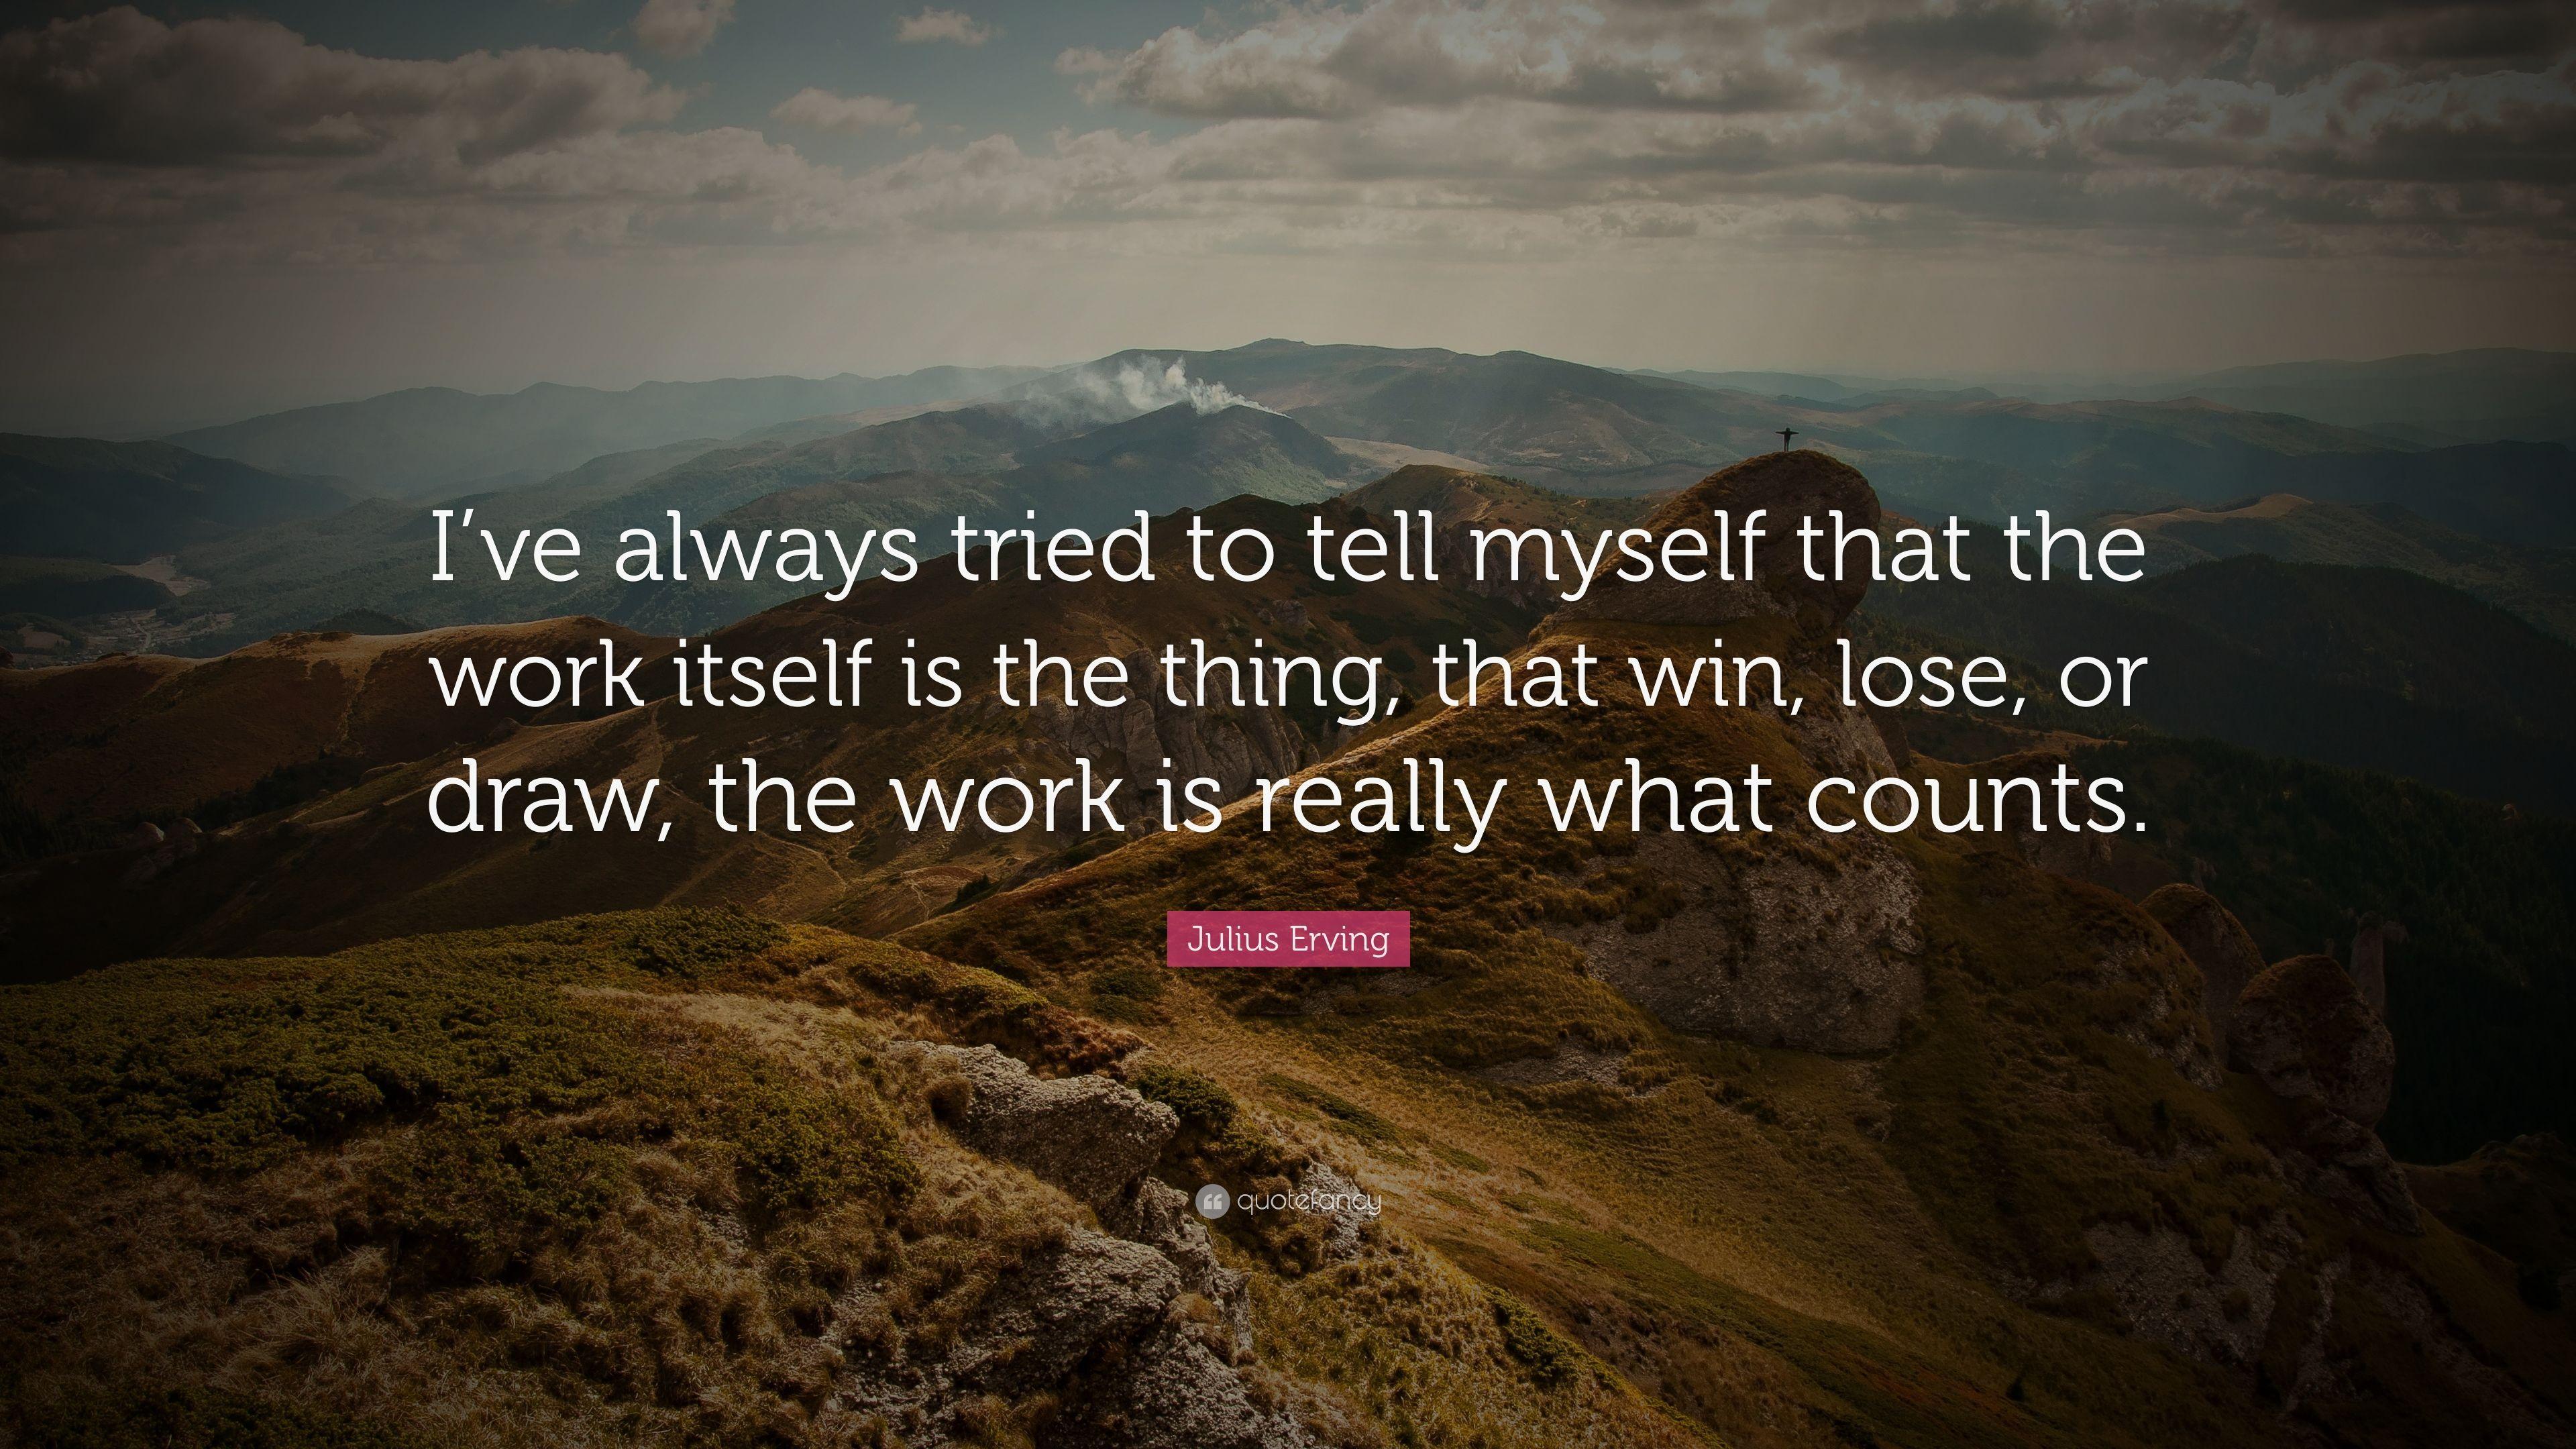 Julius Erving Quote: “I've always tried to tell myself that